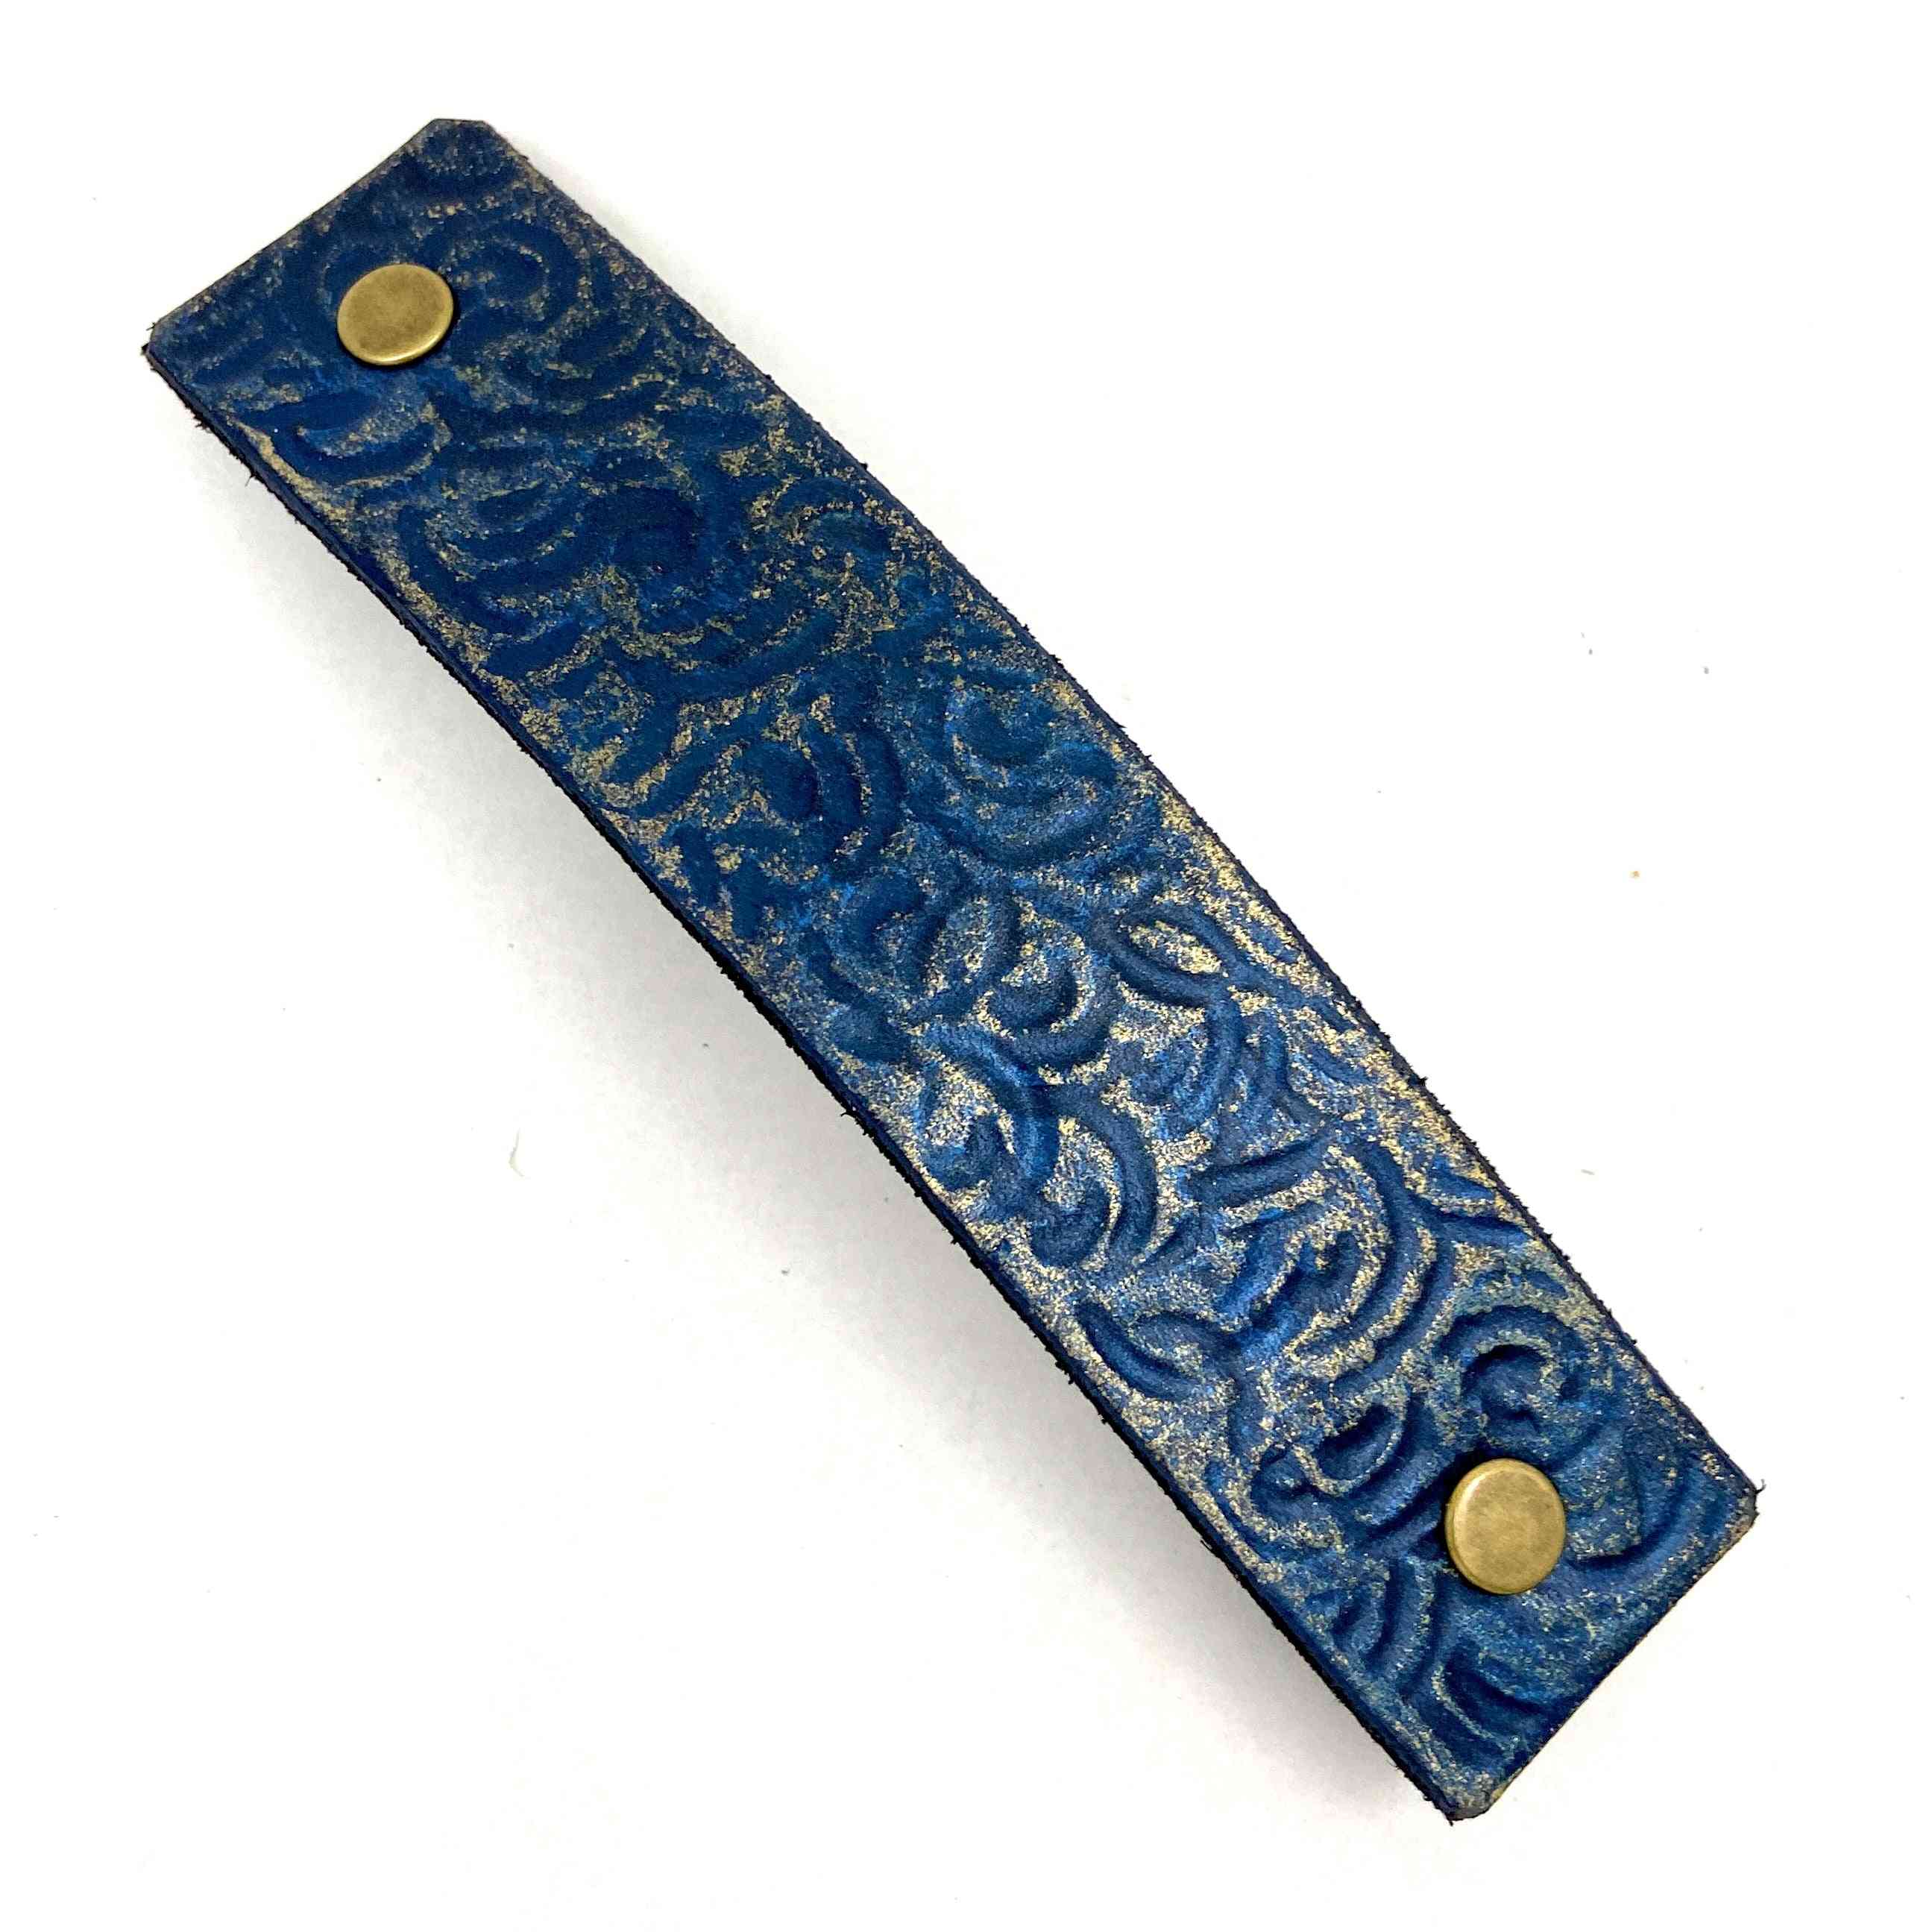 Lapis Blue & Gold Leather Barrette With Rustic Spirals Texture